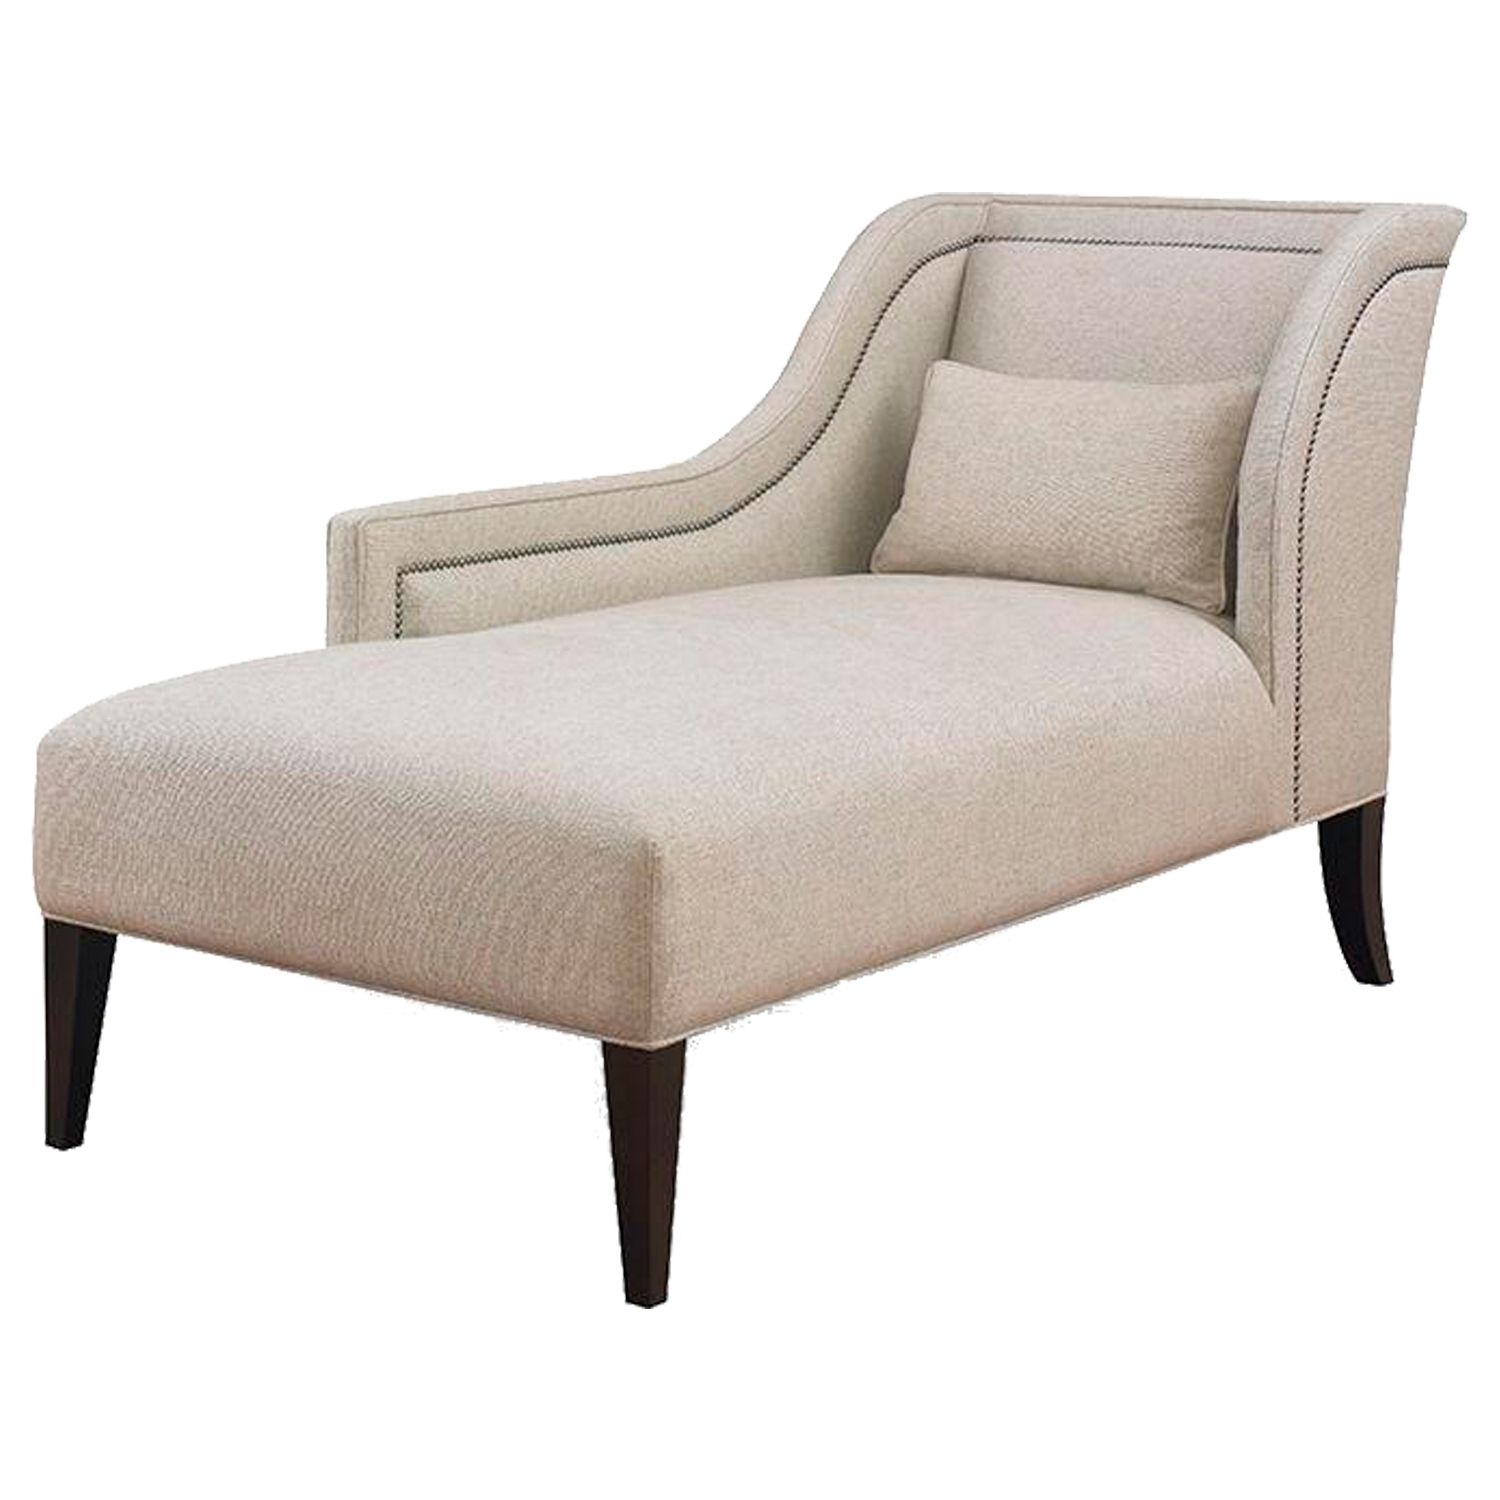 2017 Upholstered Chaise Lounges Intended For Buy Pasadena One Arm Chaisekravet – Made To Order Designer (View 2 of 15)